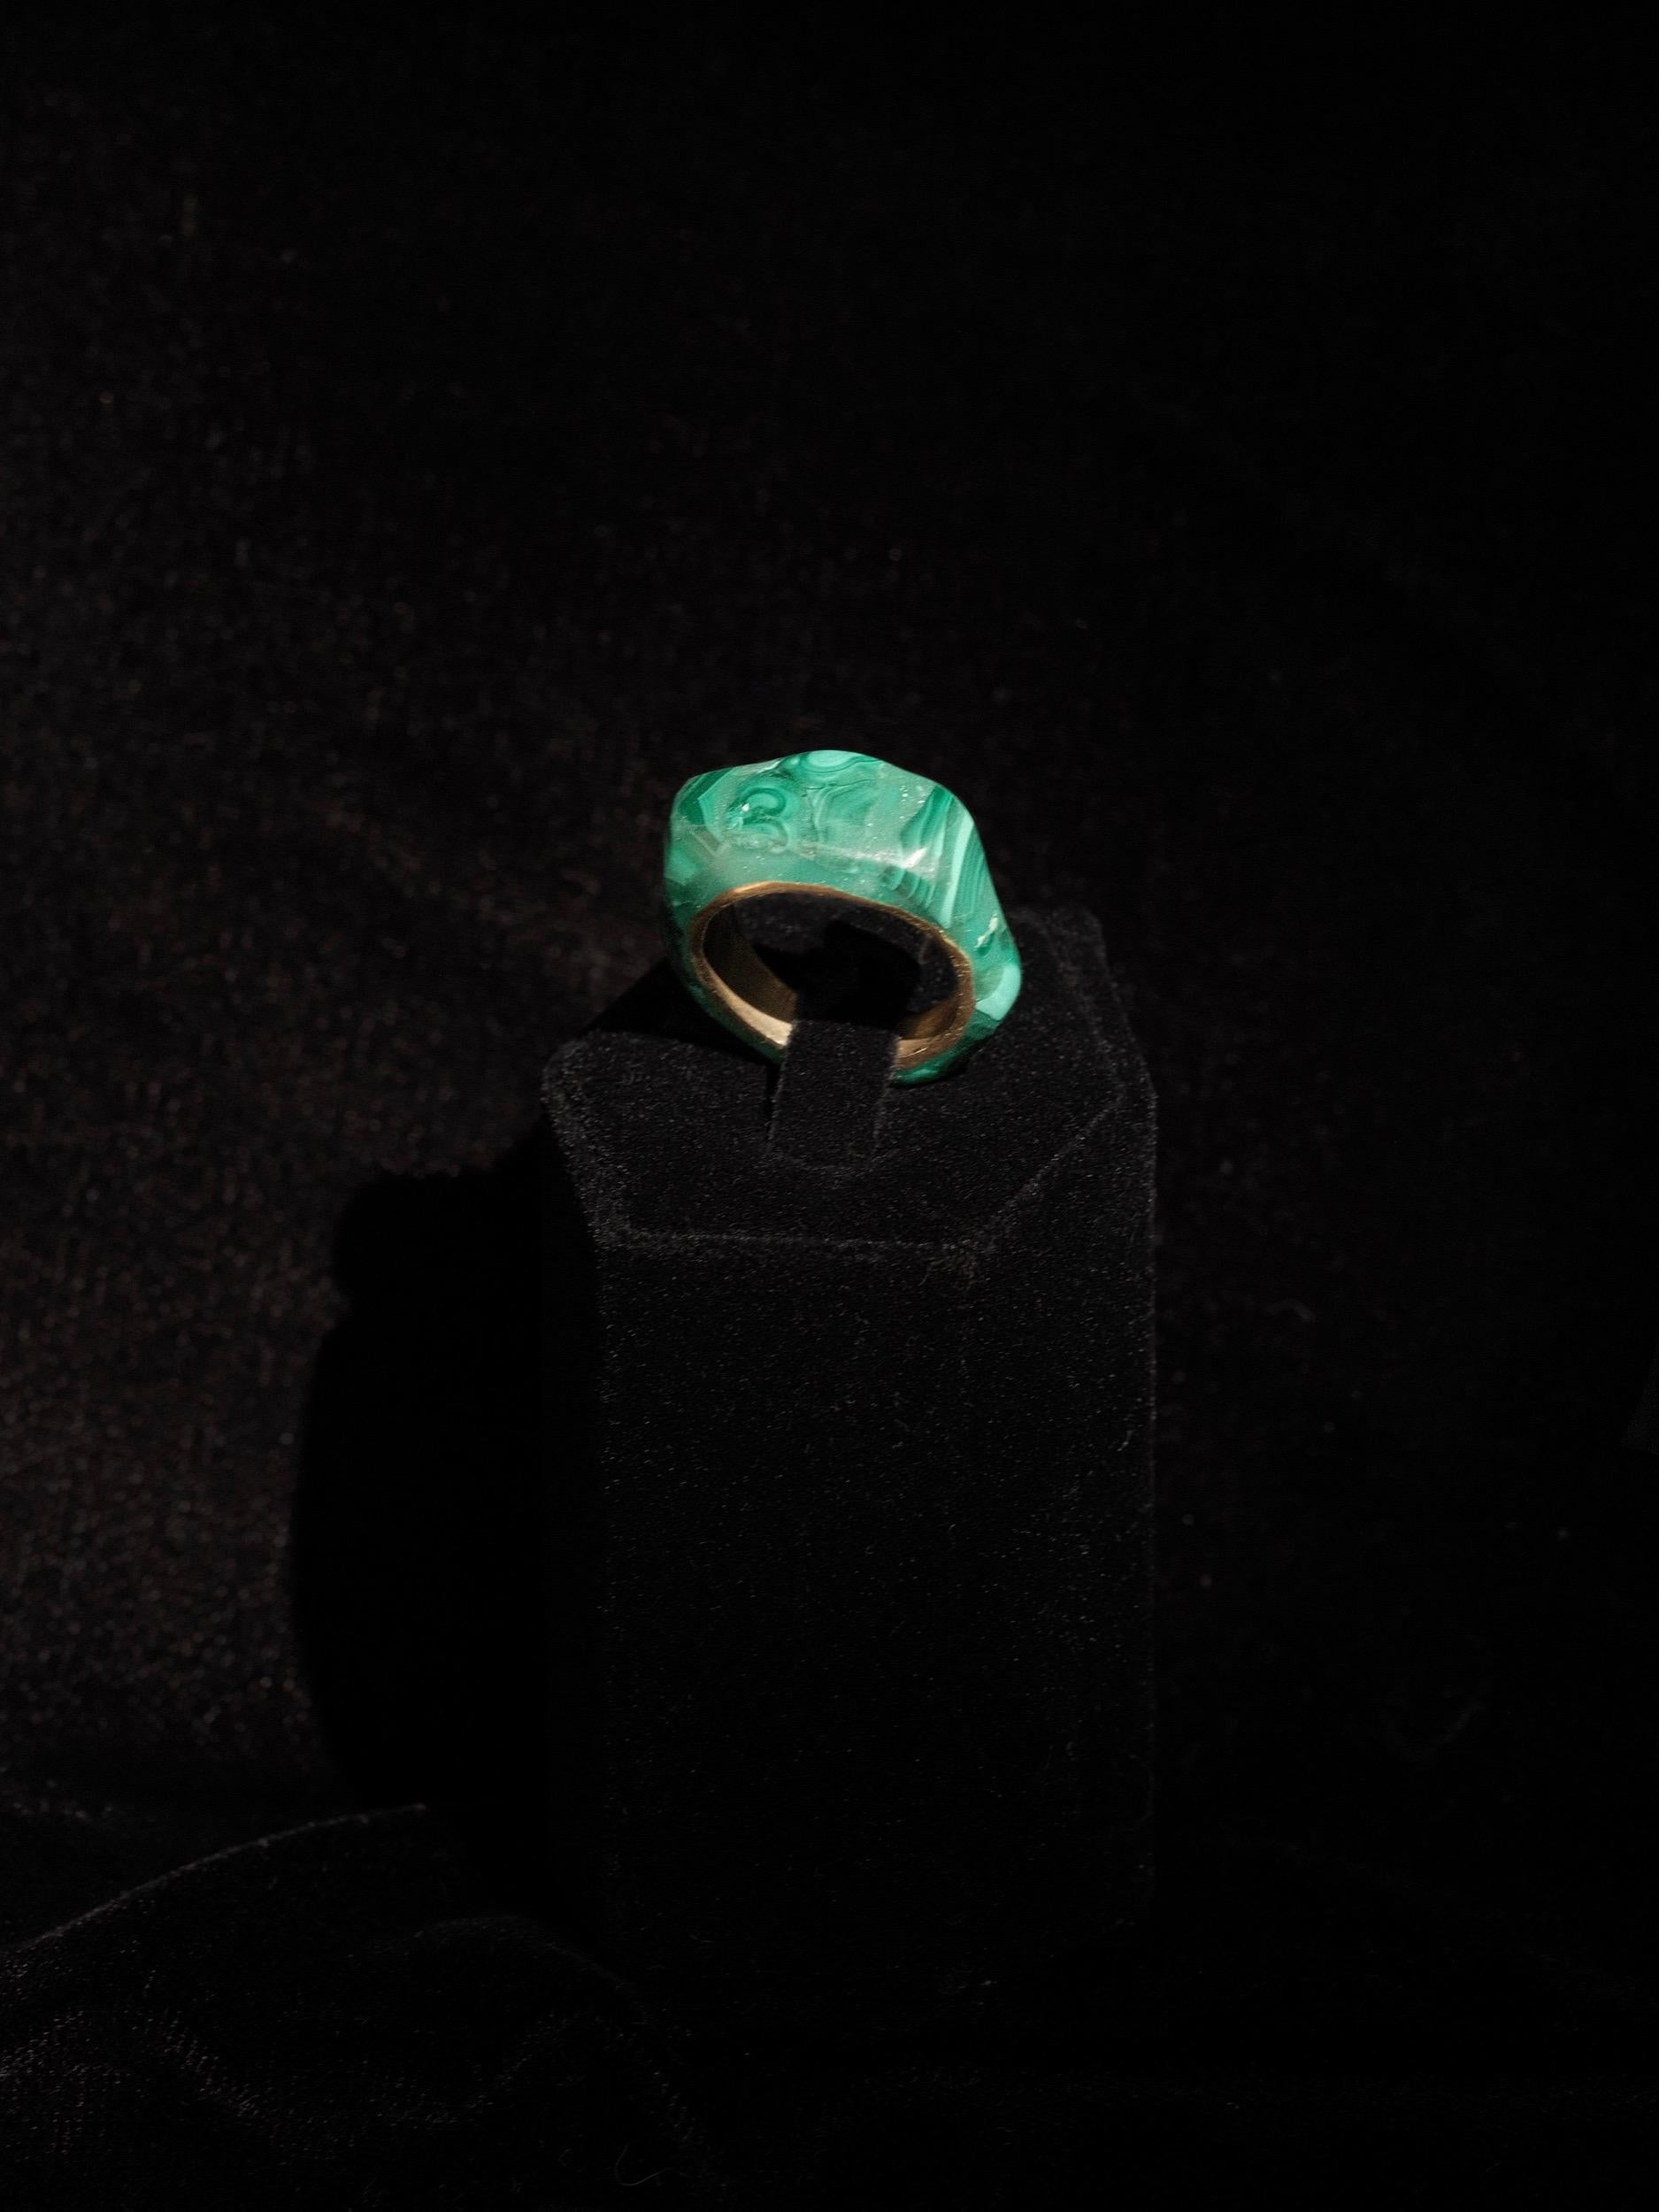 Brutalist, natural cut Malachite ring lined in brass
Size 5.5
Bright green, smooth Malachite
Made by unknown artist
Unsigned
Weighing 6.8 grams
Good vintage condition, minor tarnishing on brass
